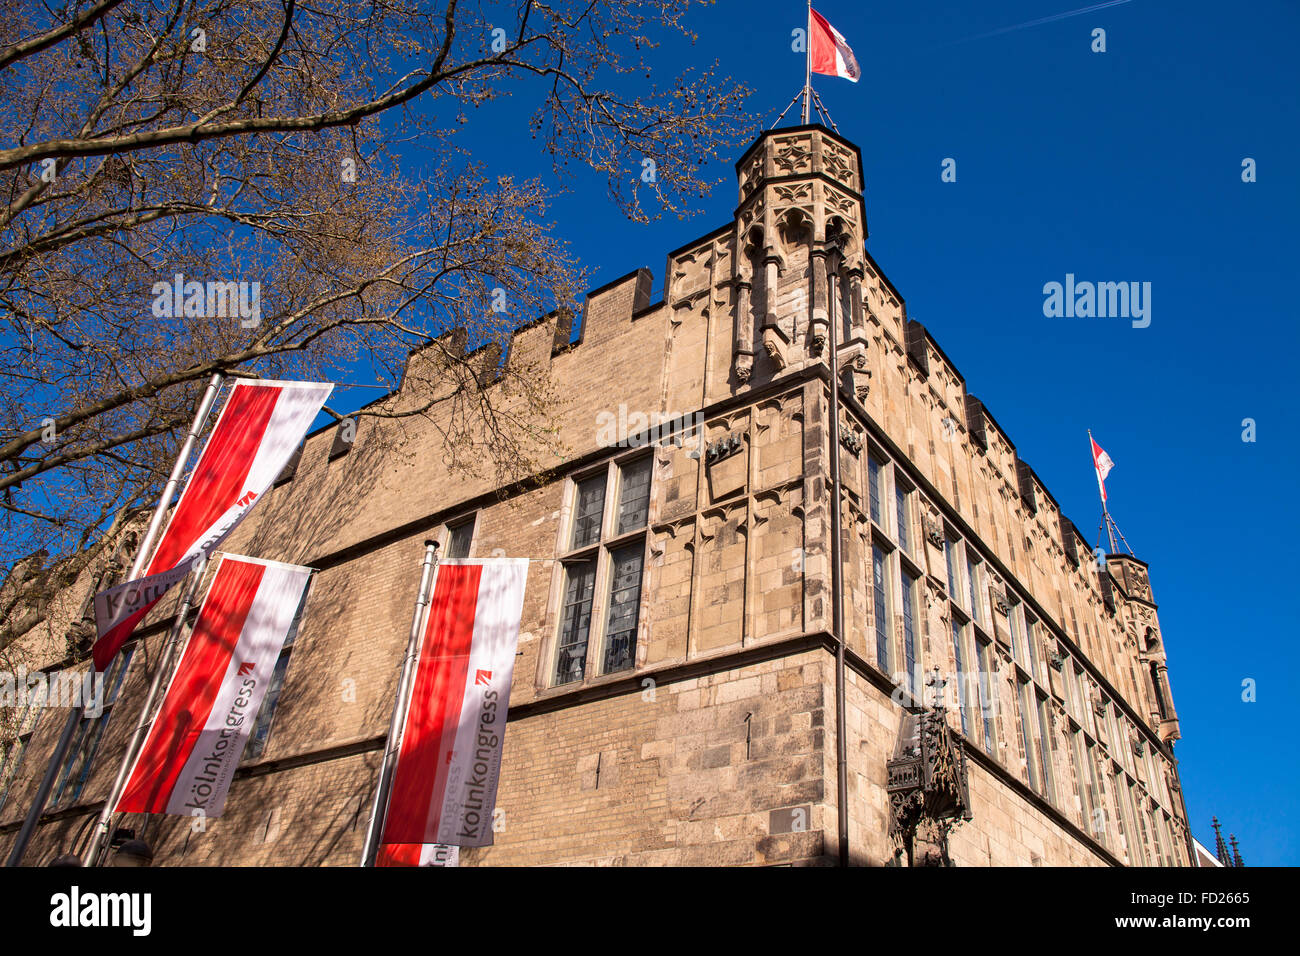 Europe, Germany, North Rhine-Westphalia, Cologne, the Guerzenich building in the historic town. Stock Photo